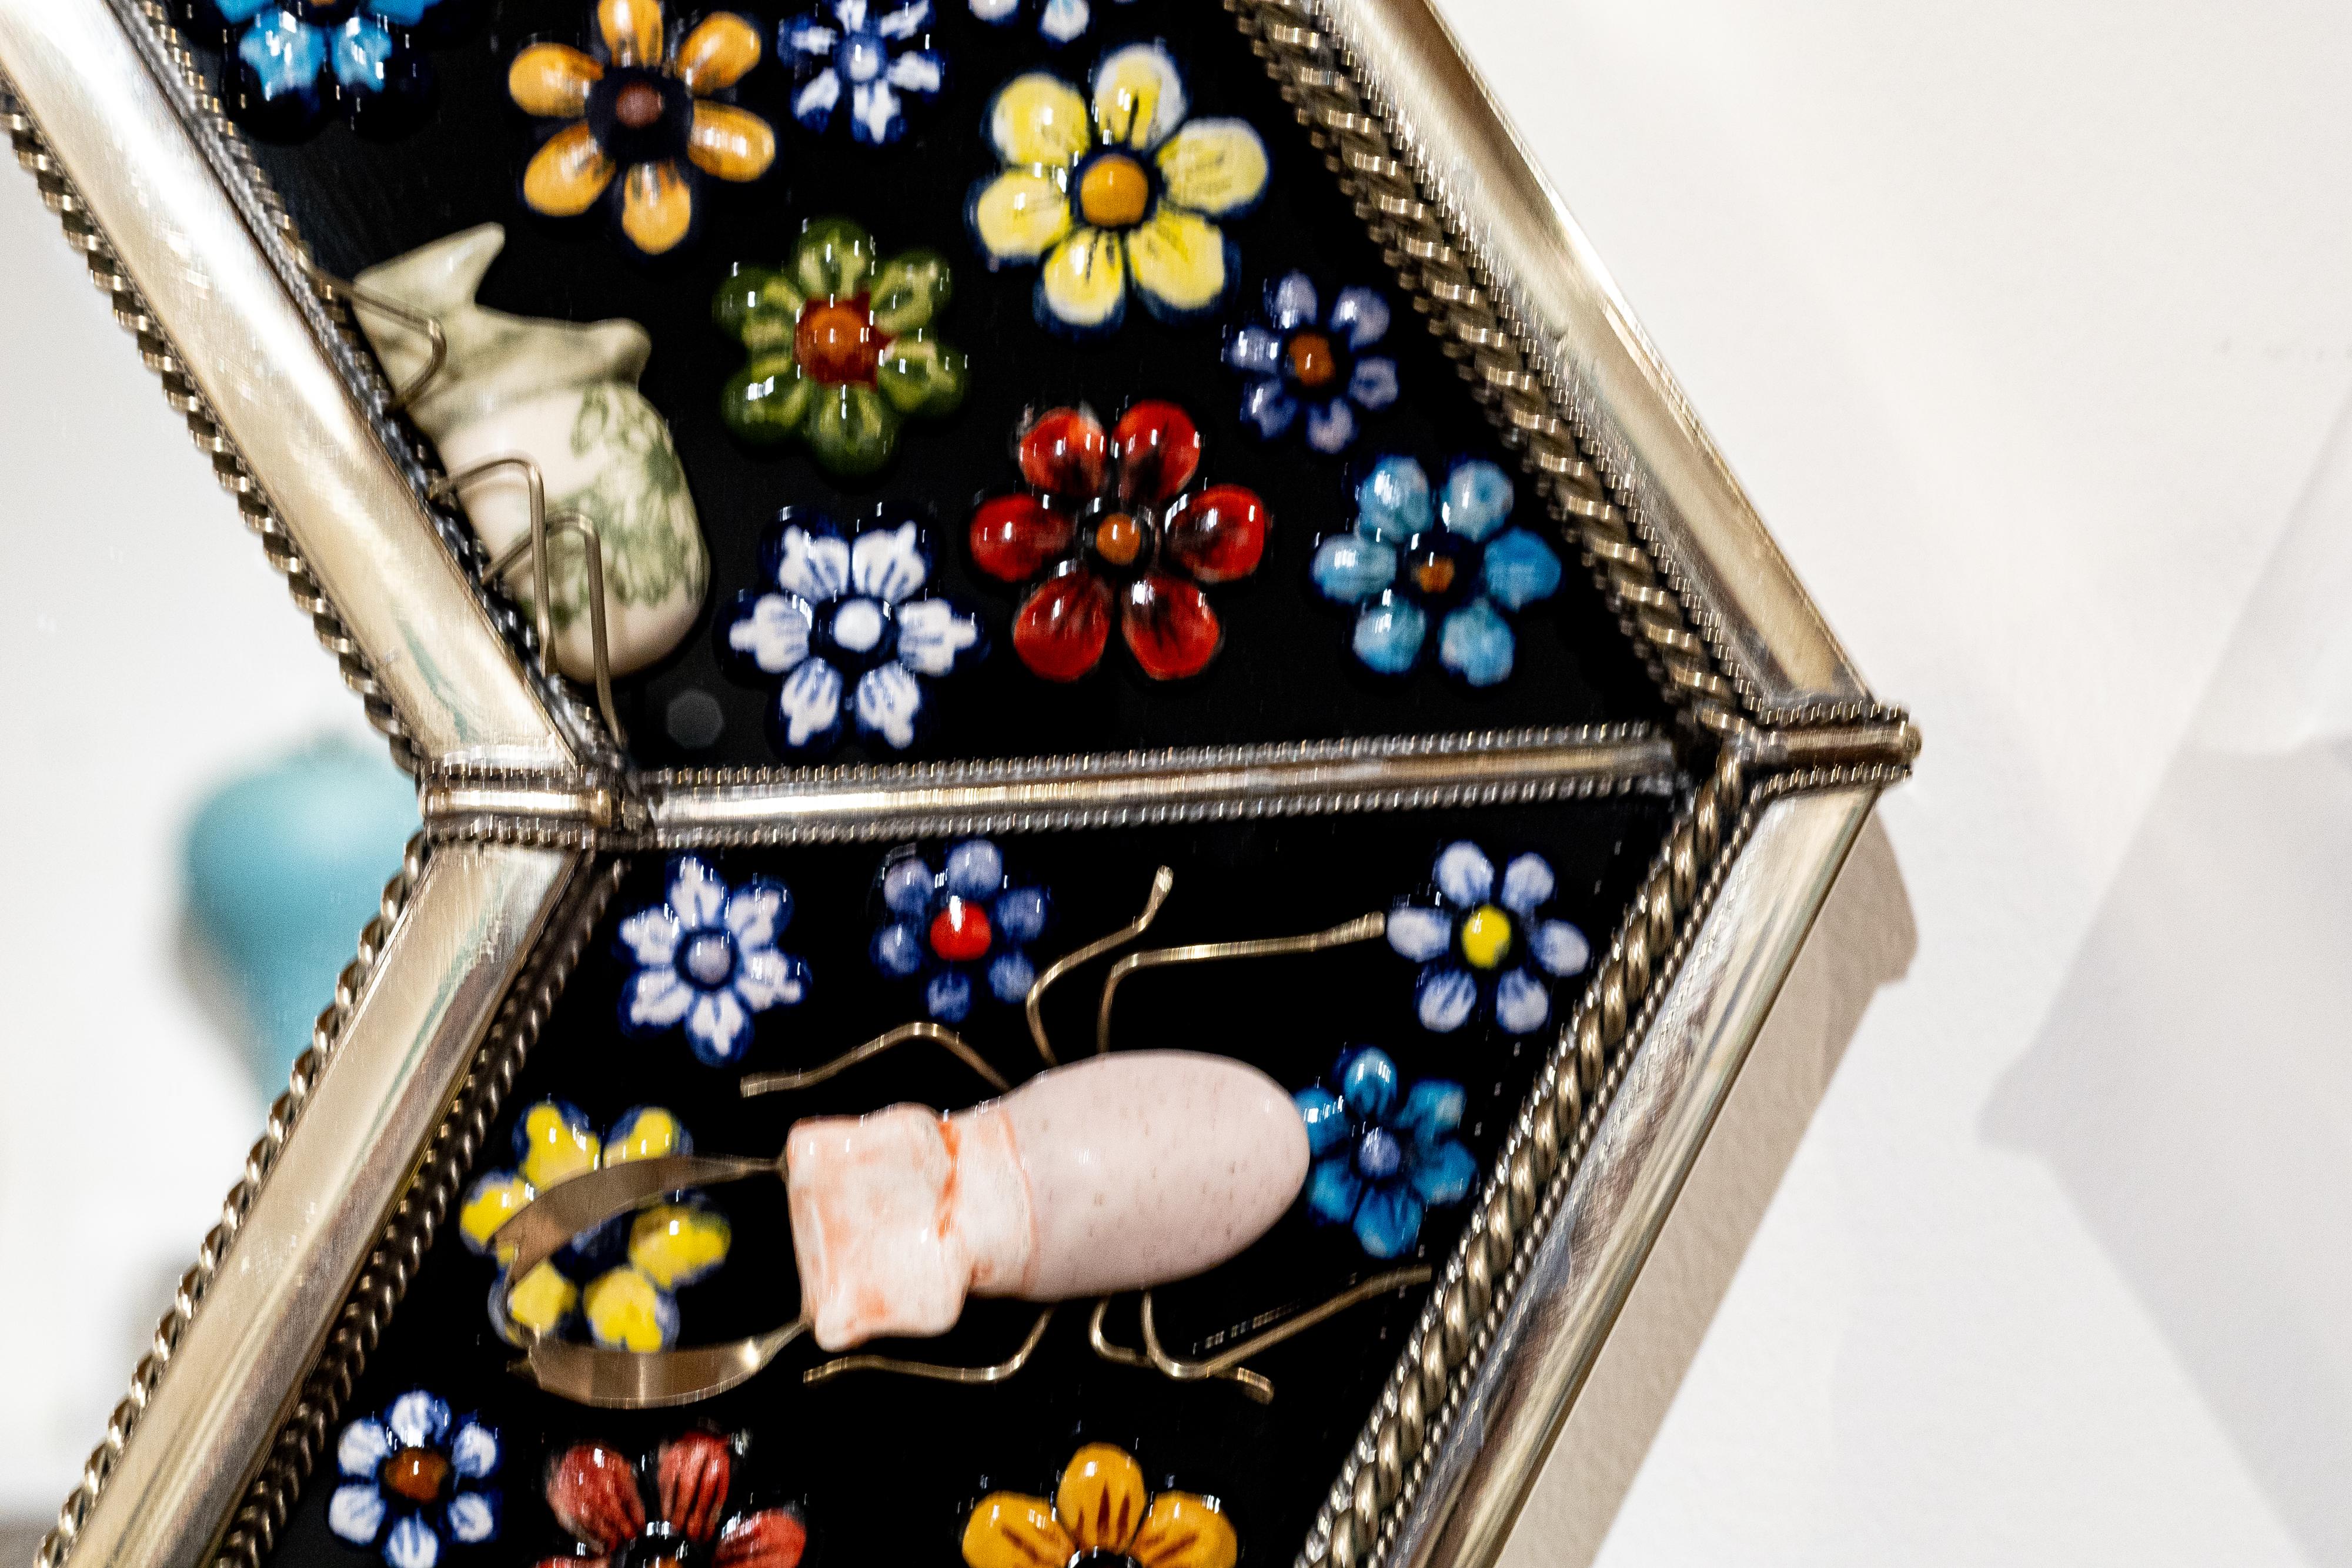 Glazed Hexagonal Mirror, Hand Painted Ceramic Flowers and Insects over White Metal